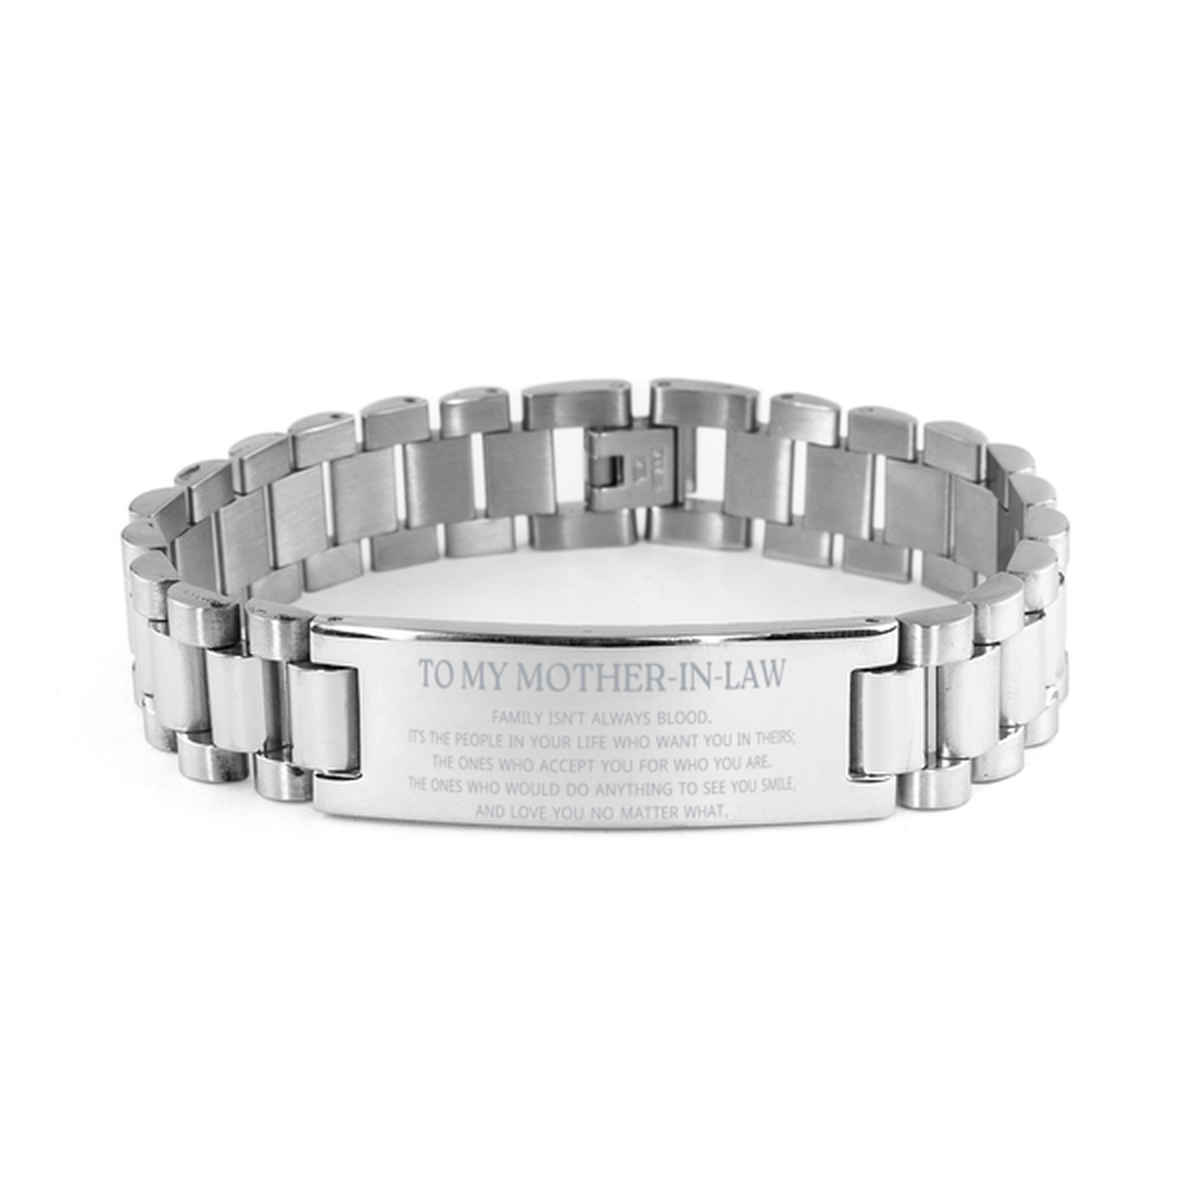 To My Mother-In-Law Gifts, Family isn't always blood, Mother-In-Law Ladder Stainless Steel Bracelet, Birthday Christmas Unique Present For Mother-In-Law